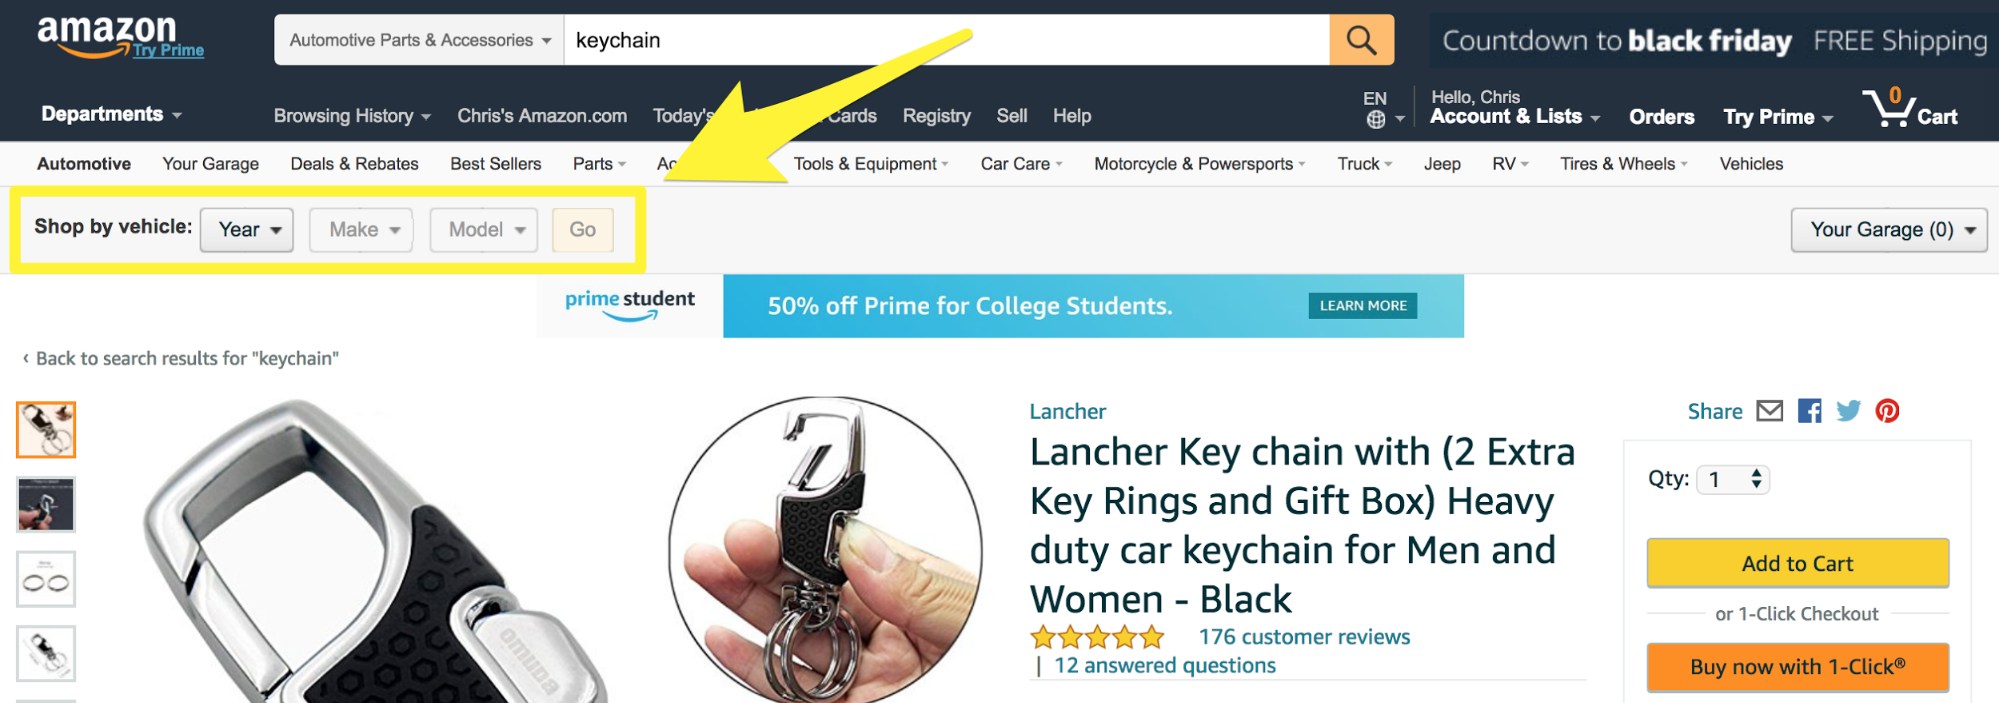 Screenshot showing the "shop by vehicle" option on amazon